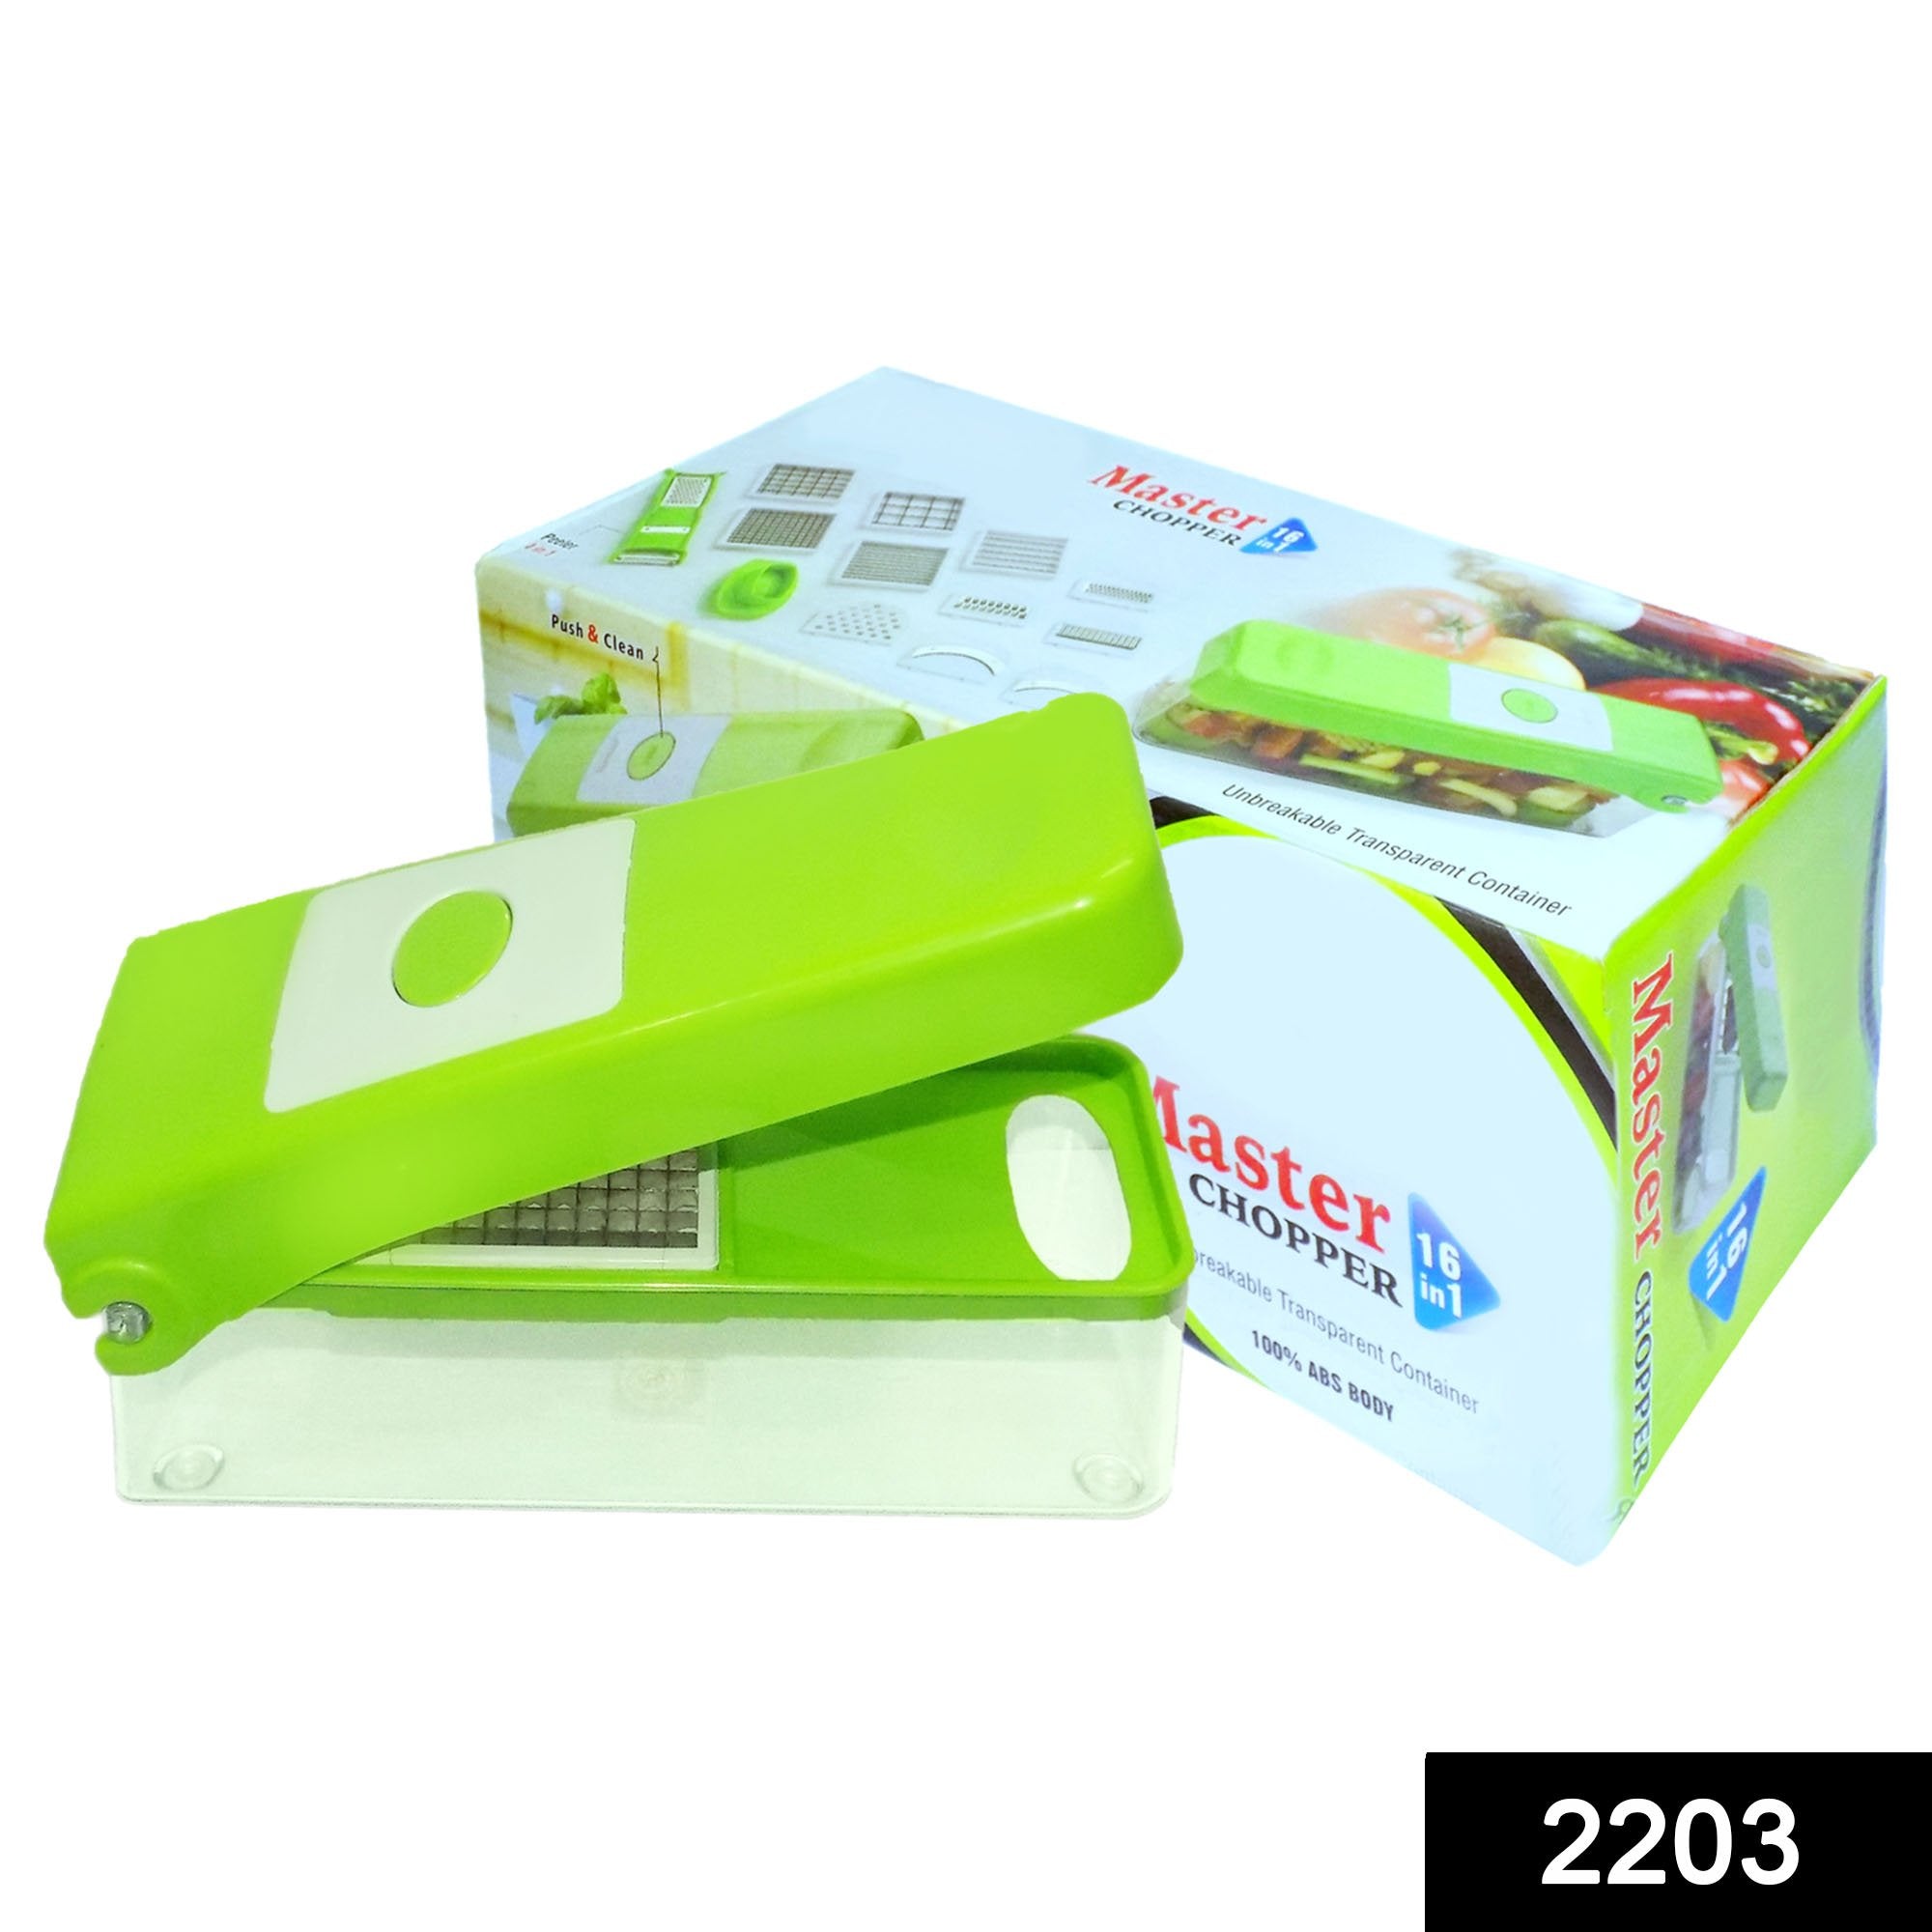 2203 Plastic Big 16 in 1 Dicer with Cutter with easy Push and pull Button - SkyShopy